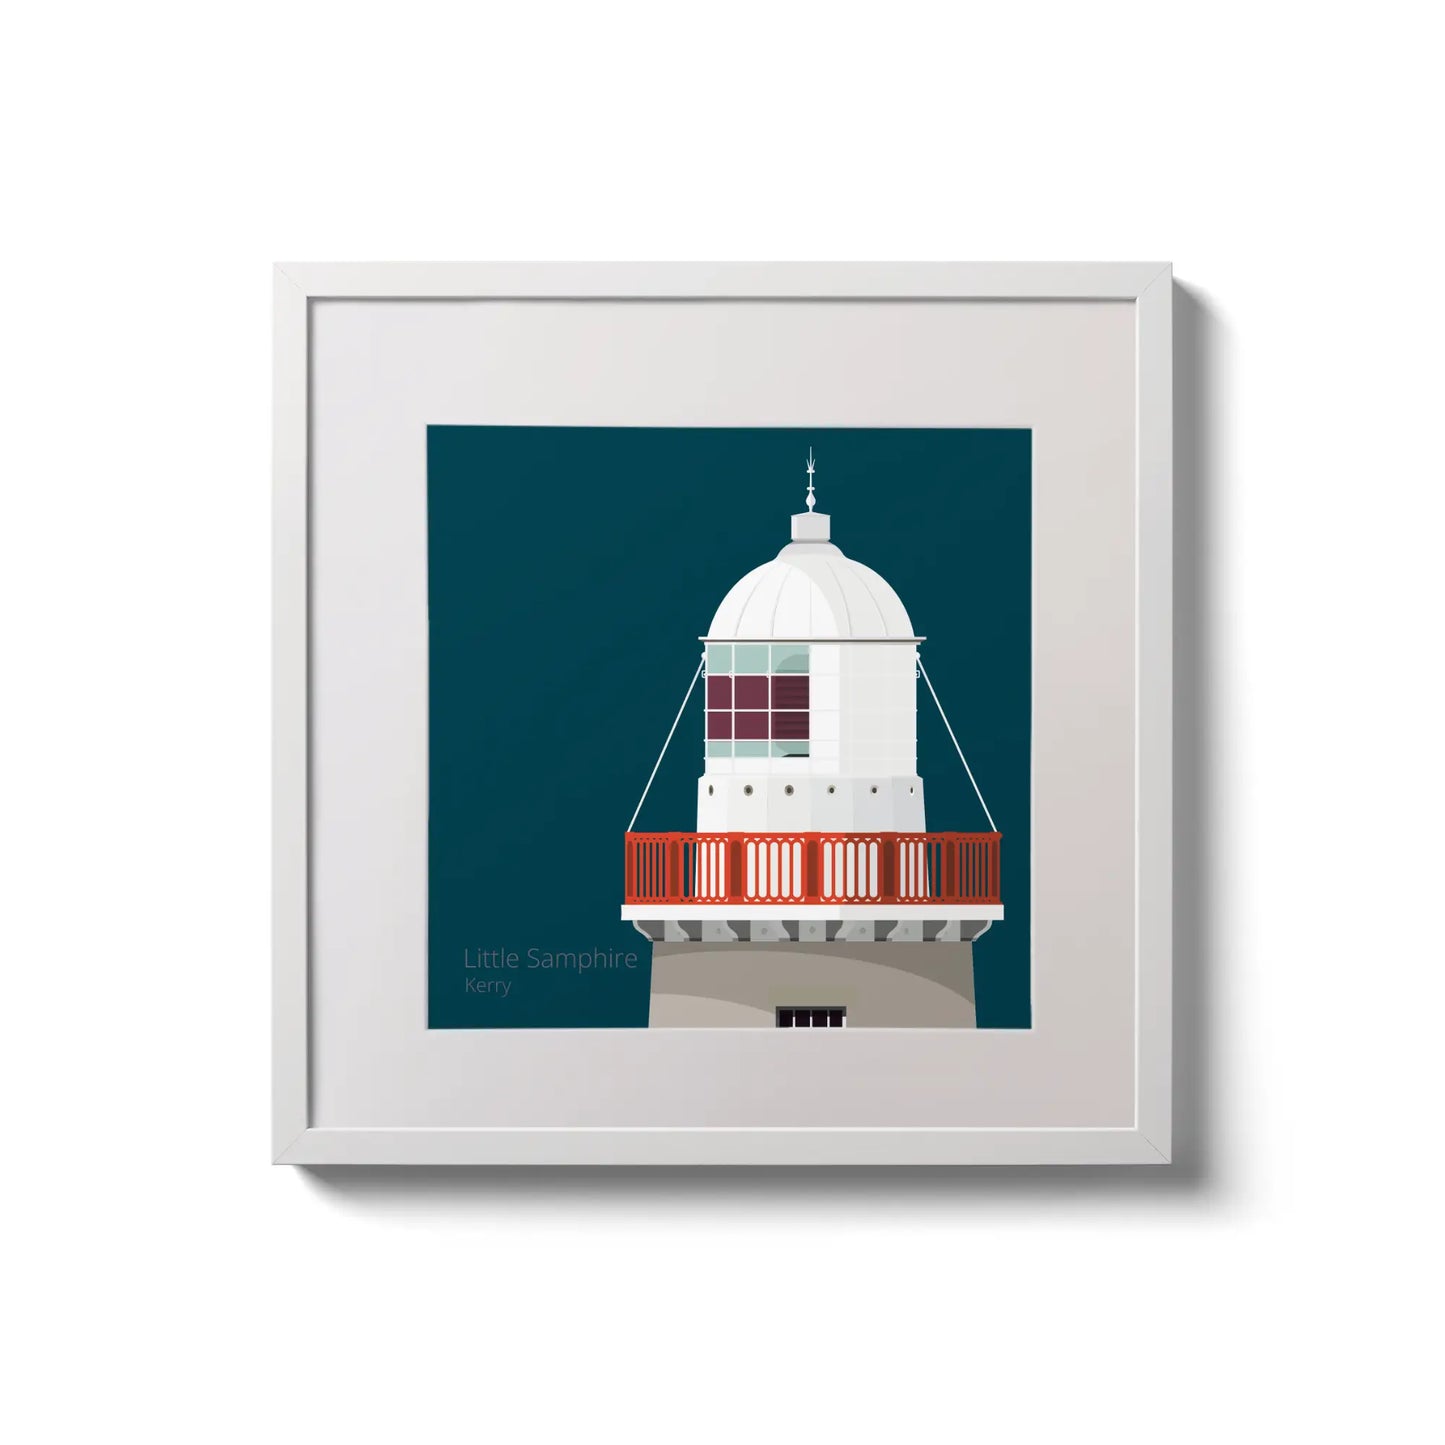 Framed wall art decoration Little Samphire lighthouse on a midnight blue background,  in a white square frame measuring 20x20cm.